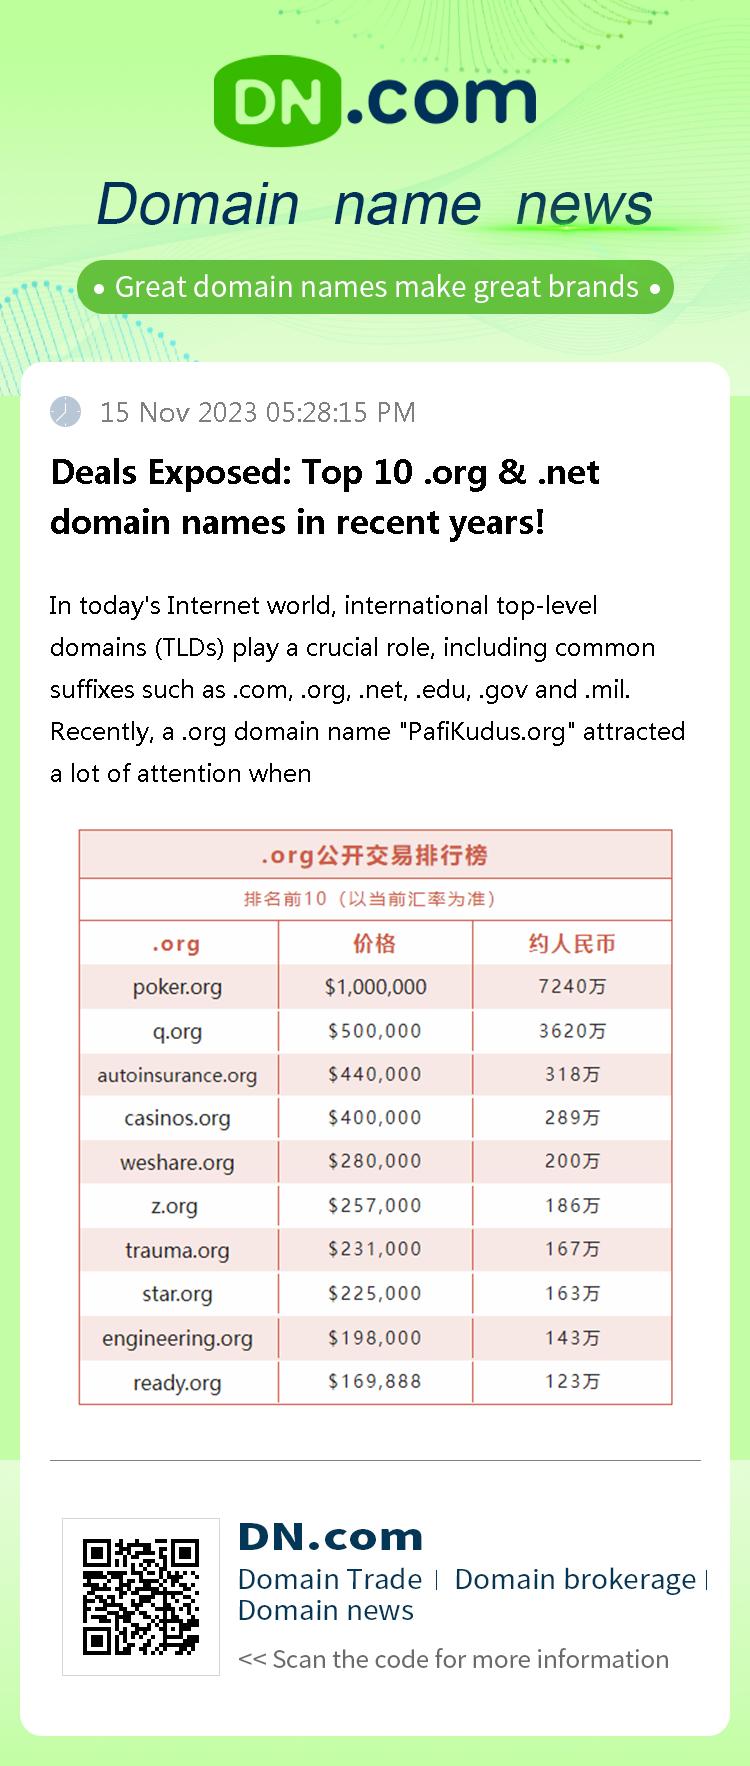 Deals Exposed: Top 10 .org & .net domain names in recent years!